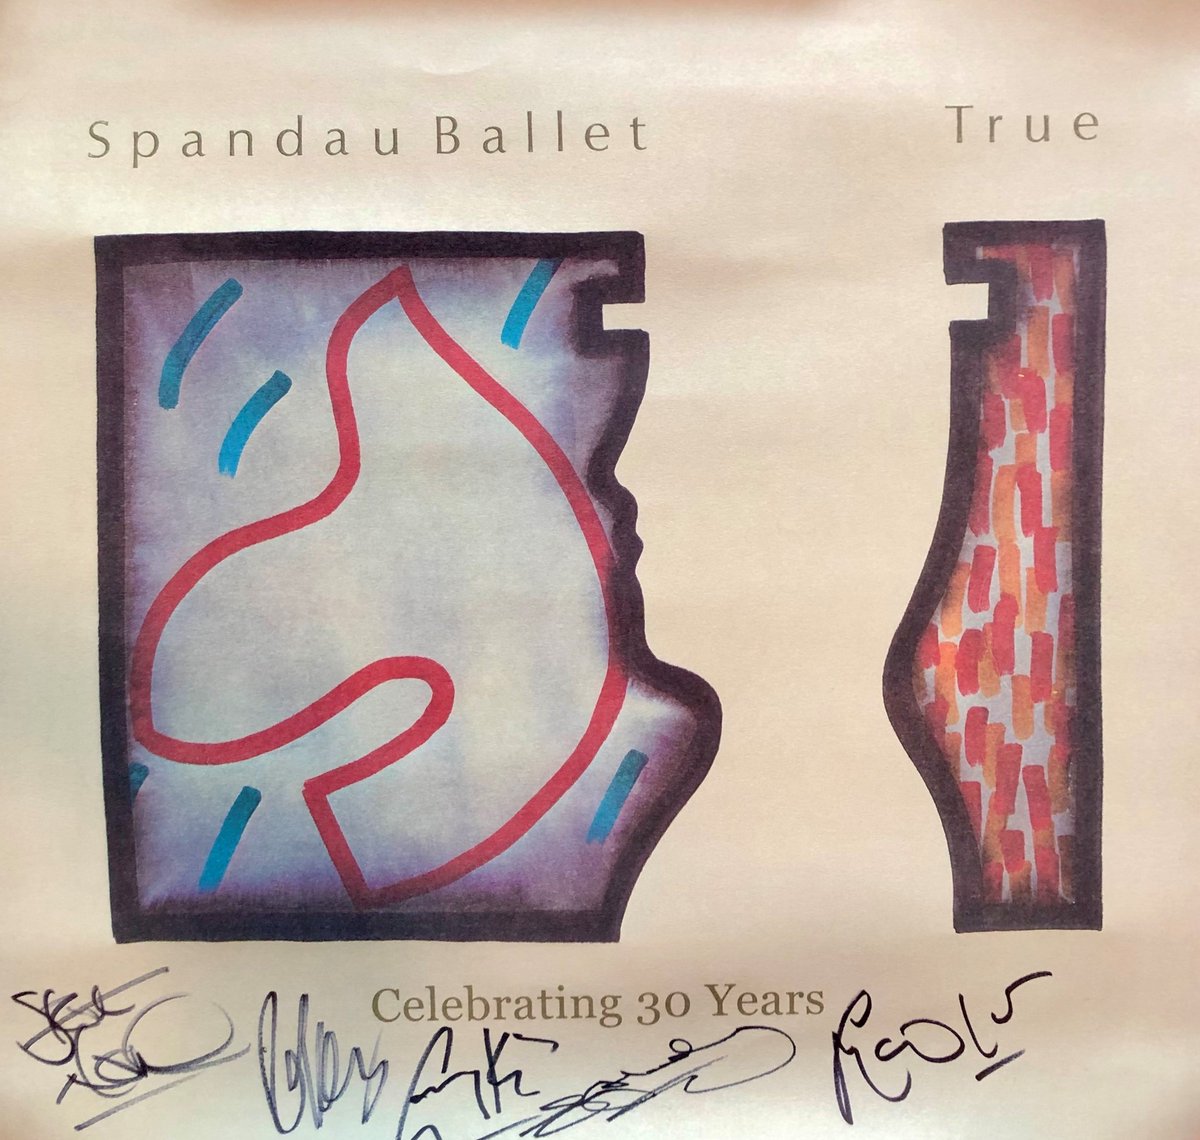 We have our True Anniversary Signed Lithograph Winner! 

Congratulations to Fiona Burt who will soon be the proud owner of the True Anniversary lithograph signed by Gary, Tony, Martin, Steve and John.

Thanks to all who entered!